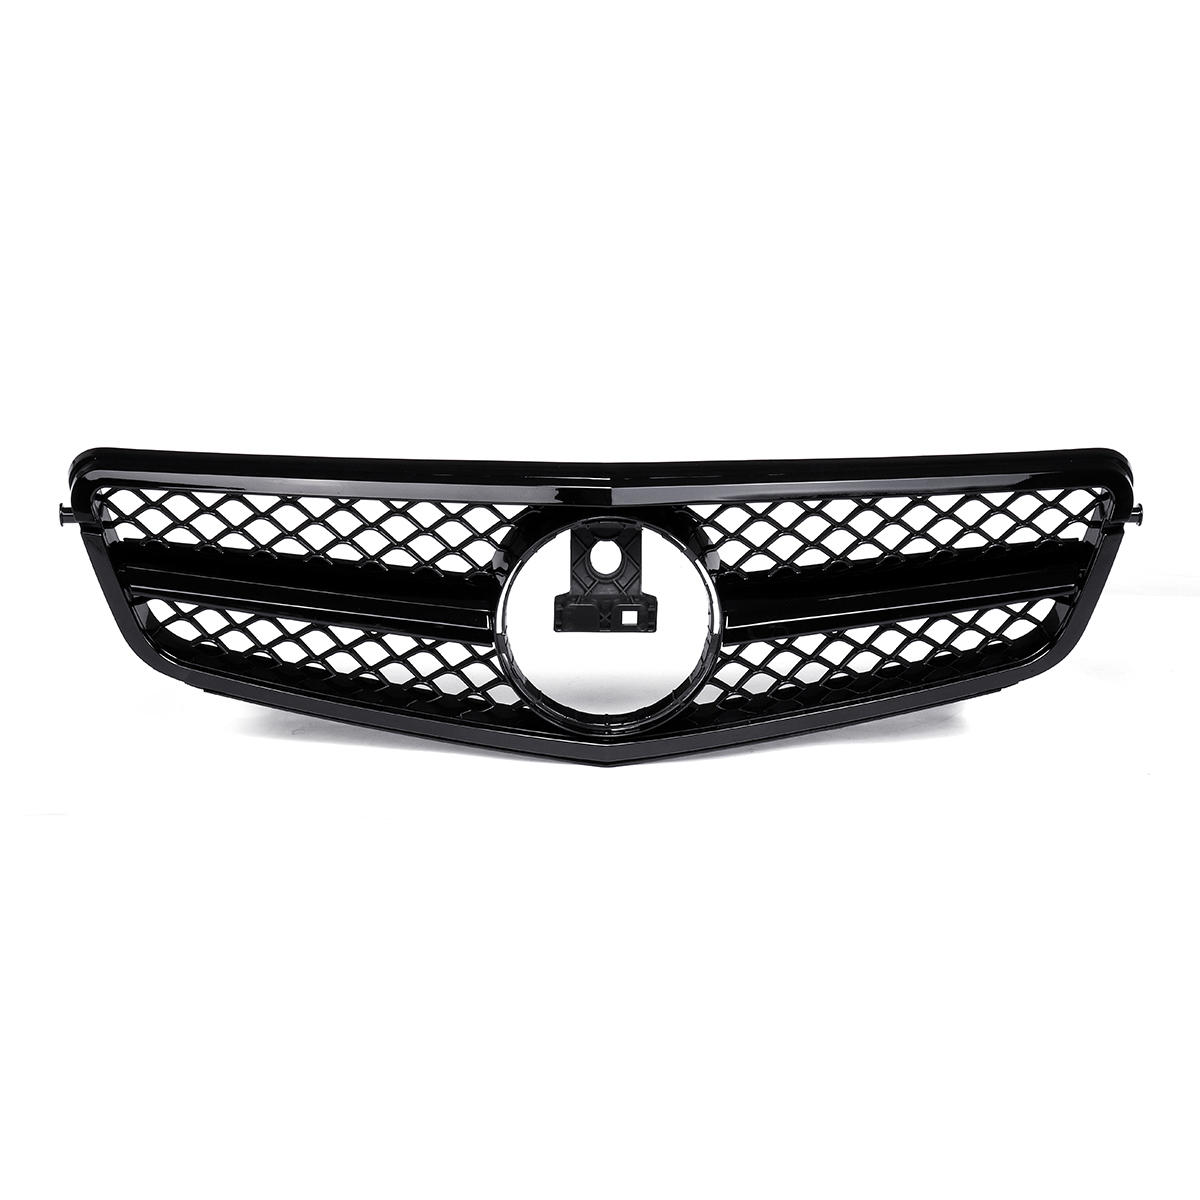 

Car C63 AMG Style Front Upper Grille Grill For Mercedes C Class W204 C180 C200 C300 C350 2008-2014